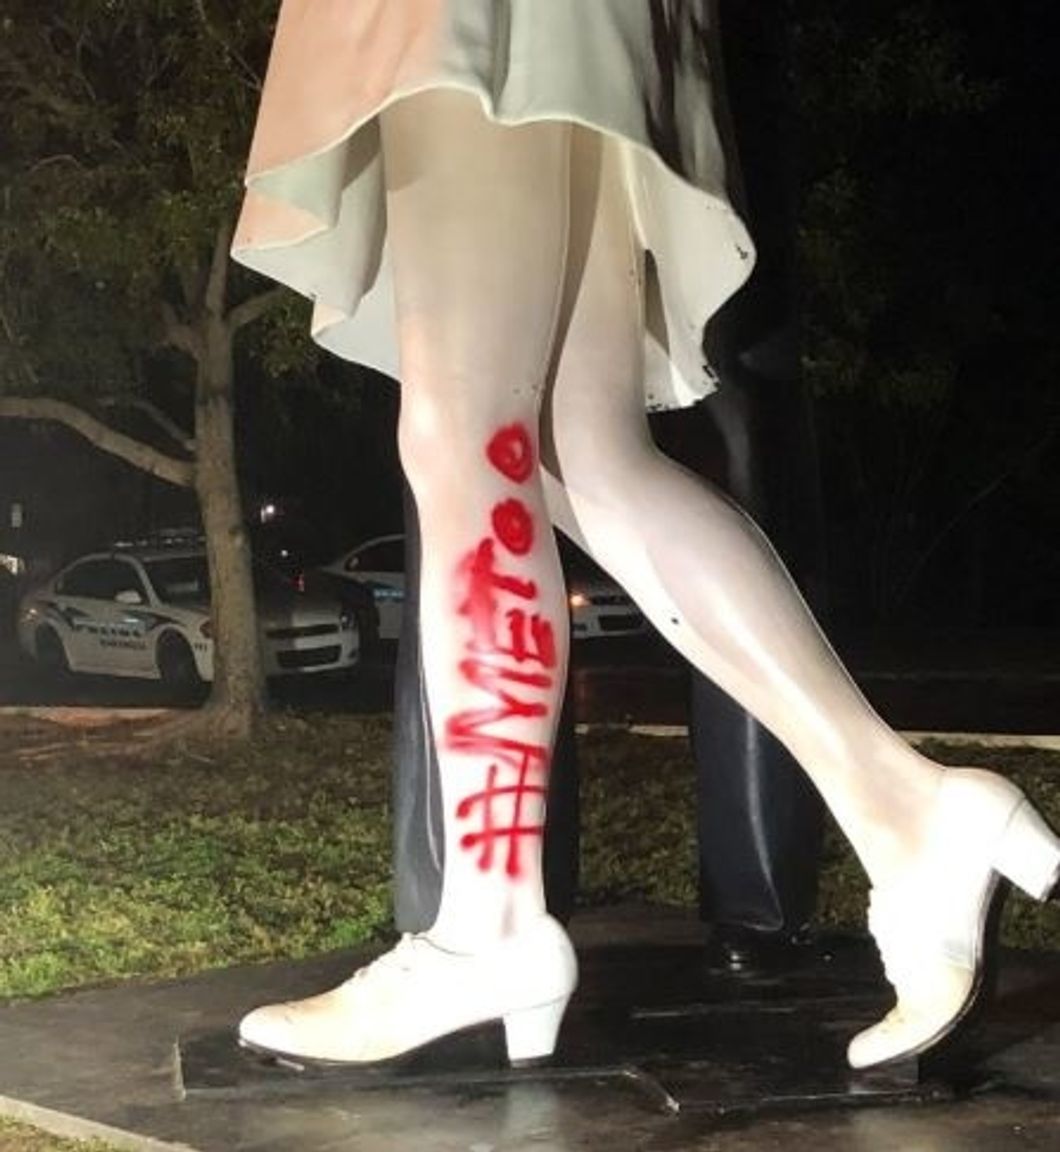 As A Sexual Abuse Victim, Painting '#MeToo' On A Sarasota War Statue Is Taking It Too Far